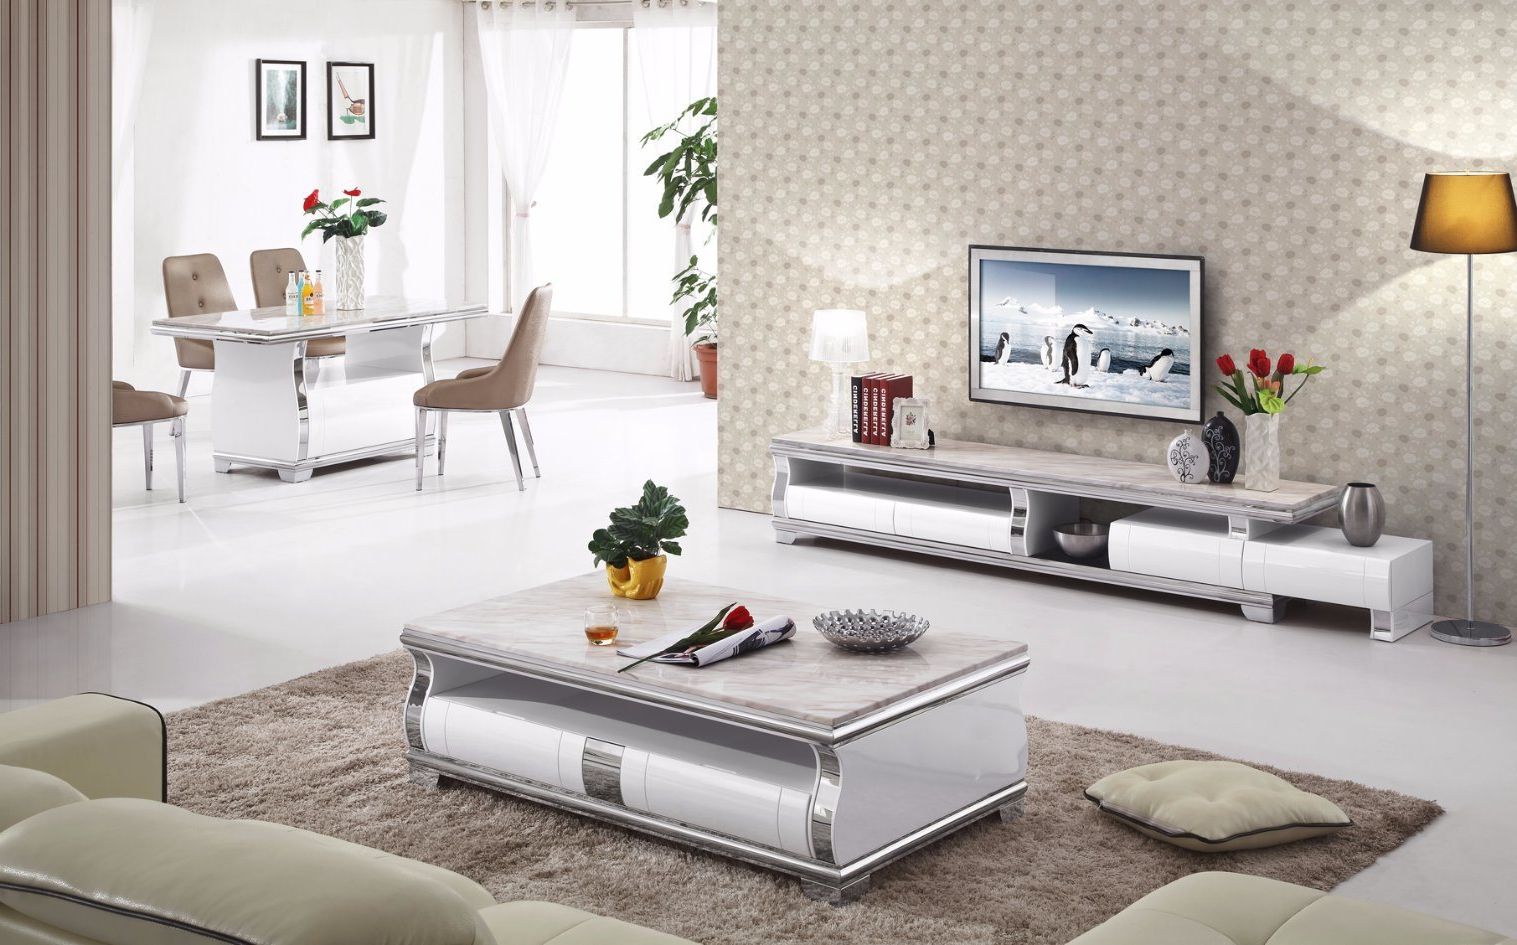 [%[hot Item] Drawing Room Set With Tv Stand And Coffee Table (112#) Pertaining To 2017 Tv Stand Coffee Table Sets|tv Stand Coffee Table Sets With Regard To Fashionable [hot Item] Drawing Room Set With Tv Stand And Coffee Table (112#)|widely Used Tv Stand Coffee Table Sets Within [hot Item] Drawing Room Set With Tv Stand And Coffee Table (112#)|famous [hot Item] Drawing Room Set With Tv Stand And Coffee Table (112#) Pertaining To Tv Stand Coffee Table Sets%] (View 6 of 20)